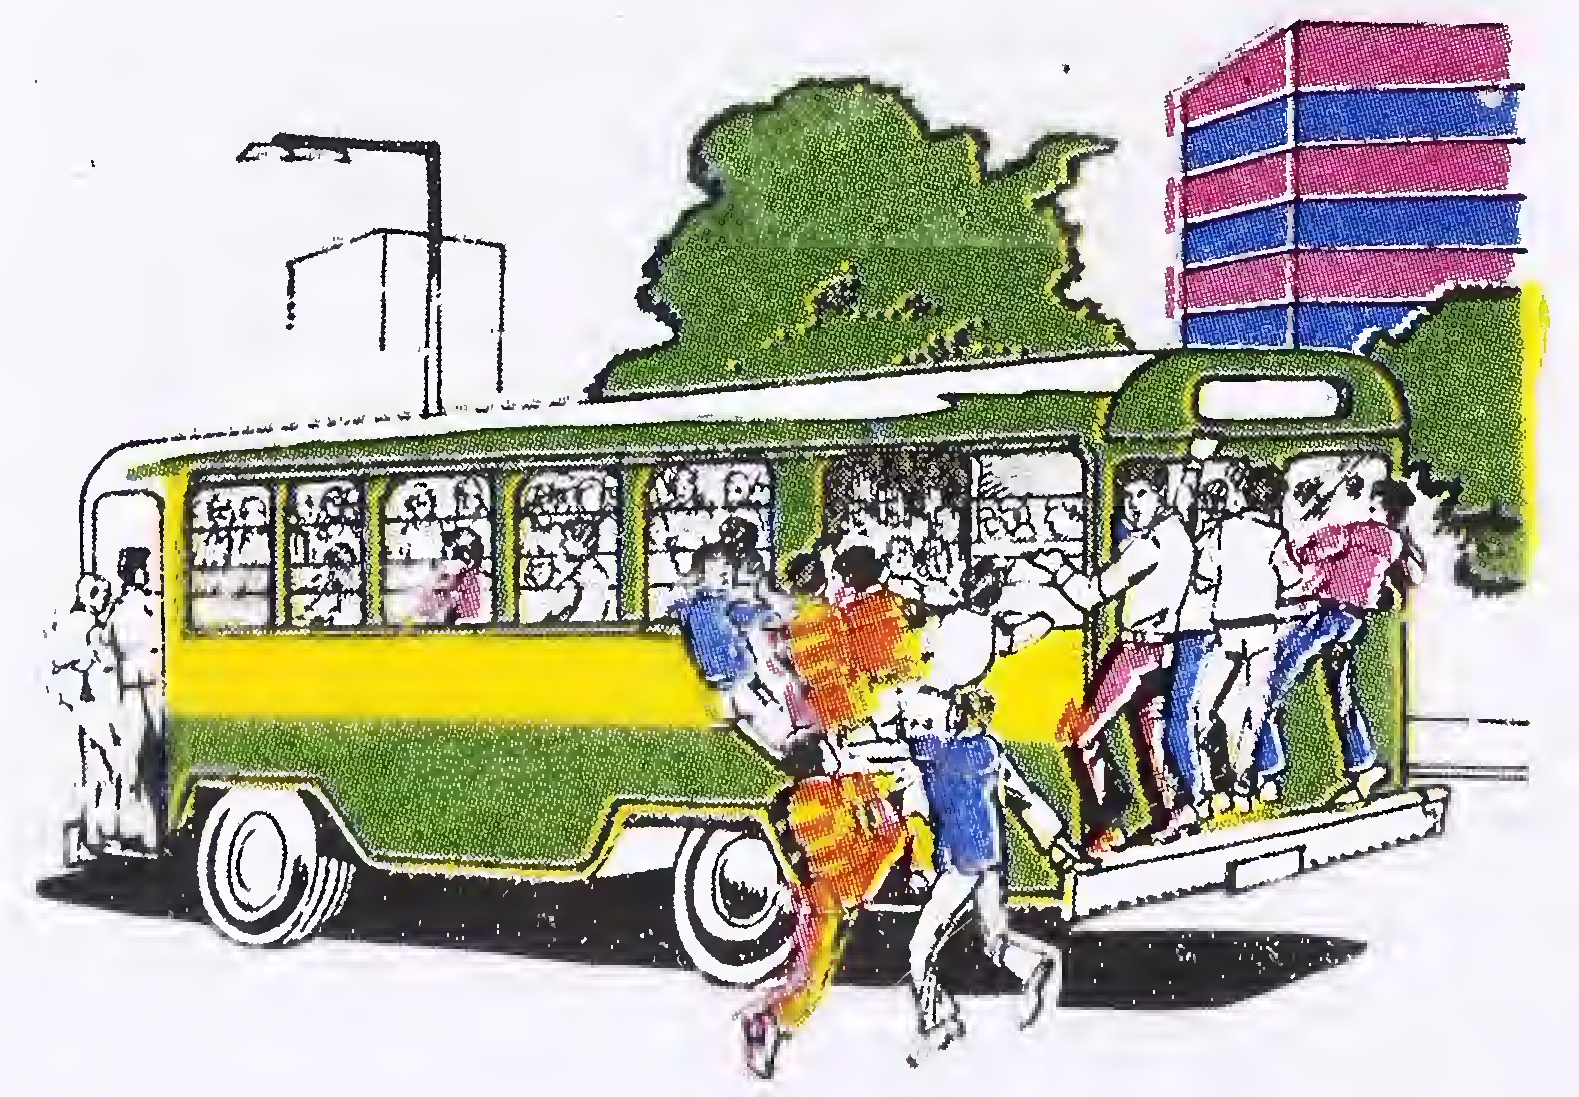 Fig. 16. Do not Board an Over-Crowded Bus